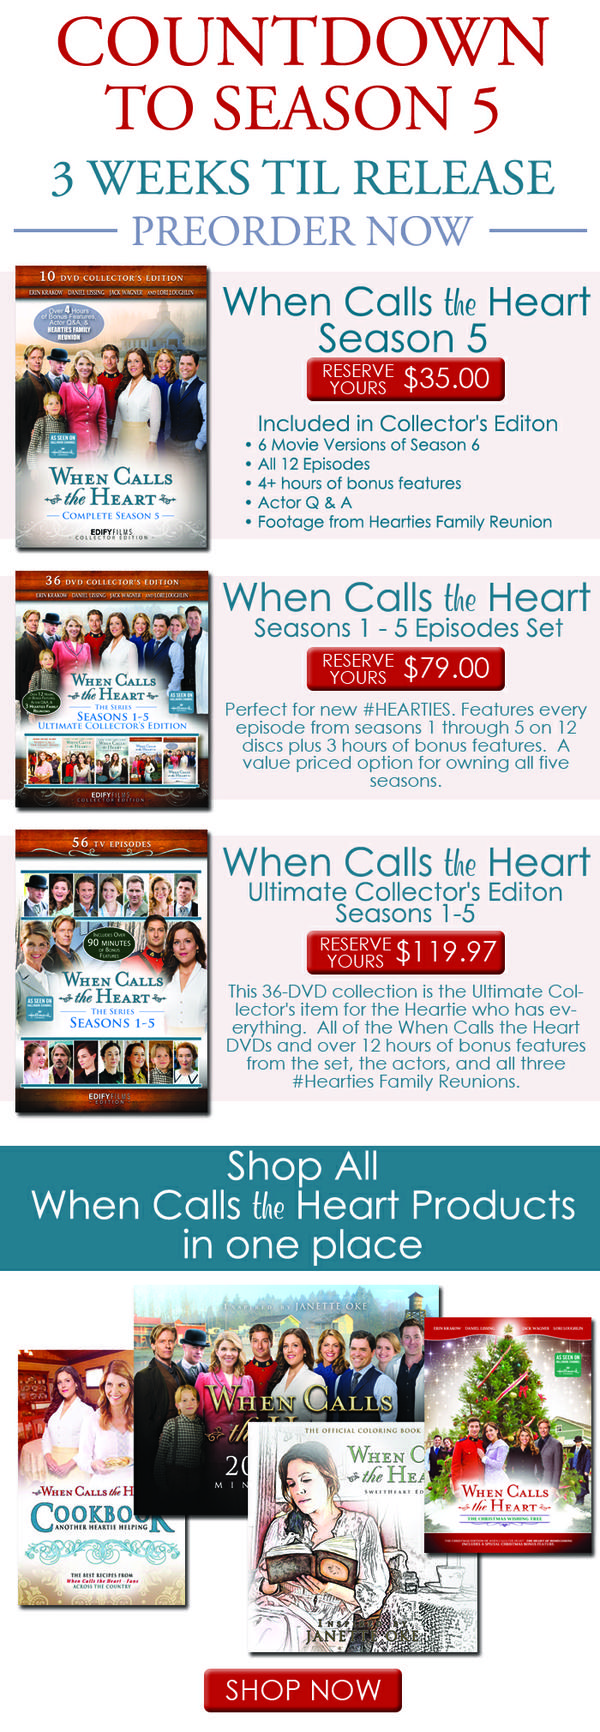 When Calls the Heart DVDs coming soon